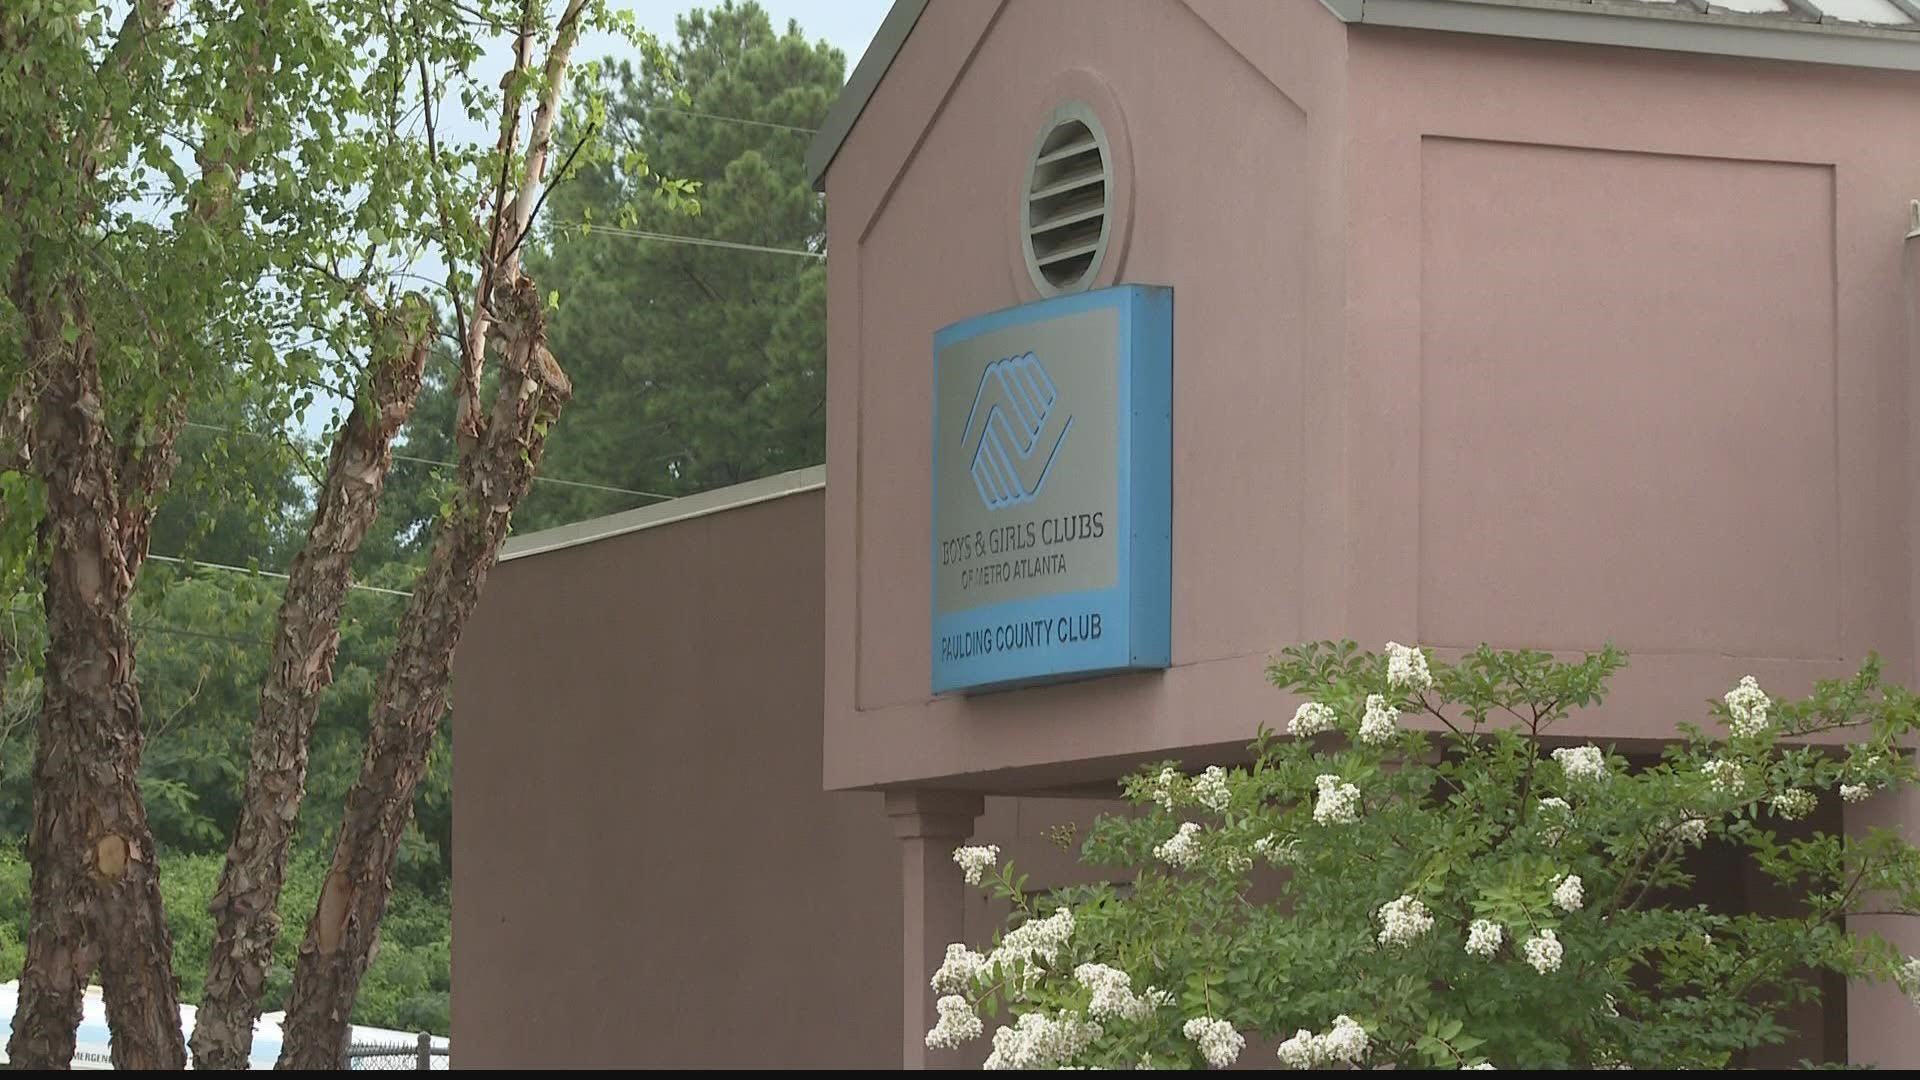 After more than two decades, the Boys and Girls Club of Paulding County will be forced to shut down. Families said this will leave nearly 200 kids in the lurch.